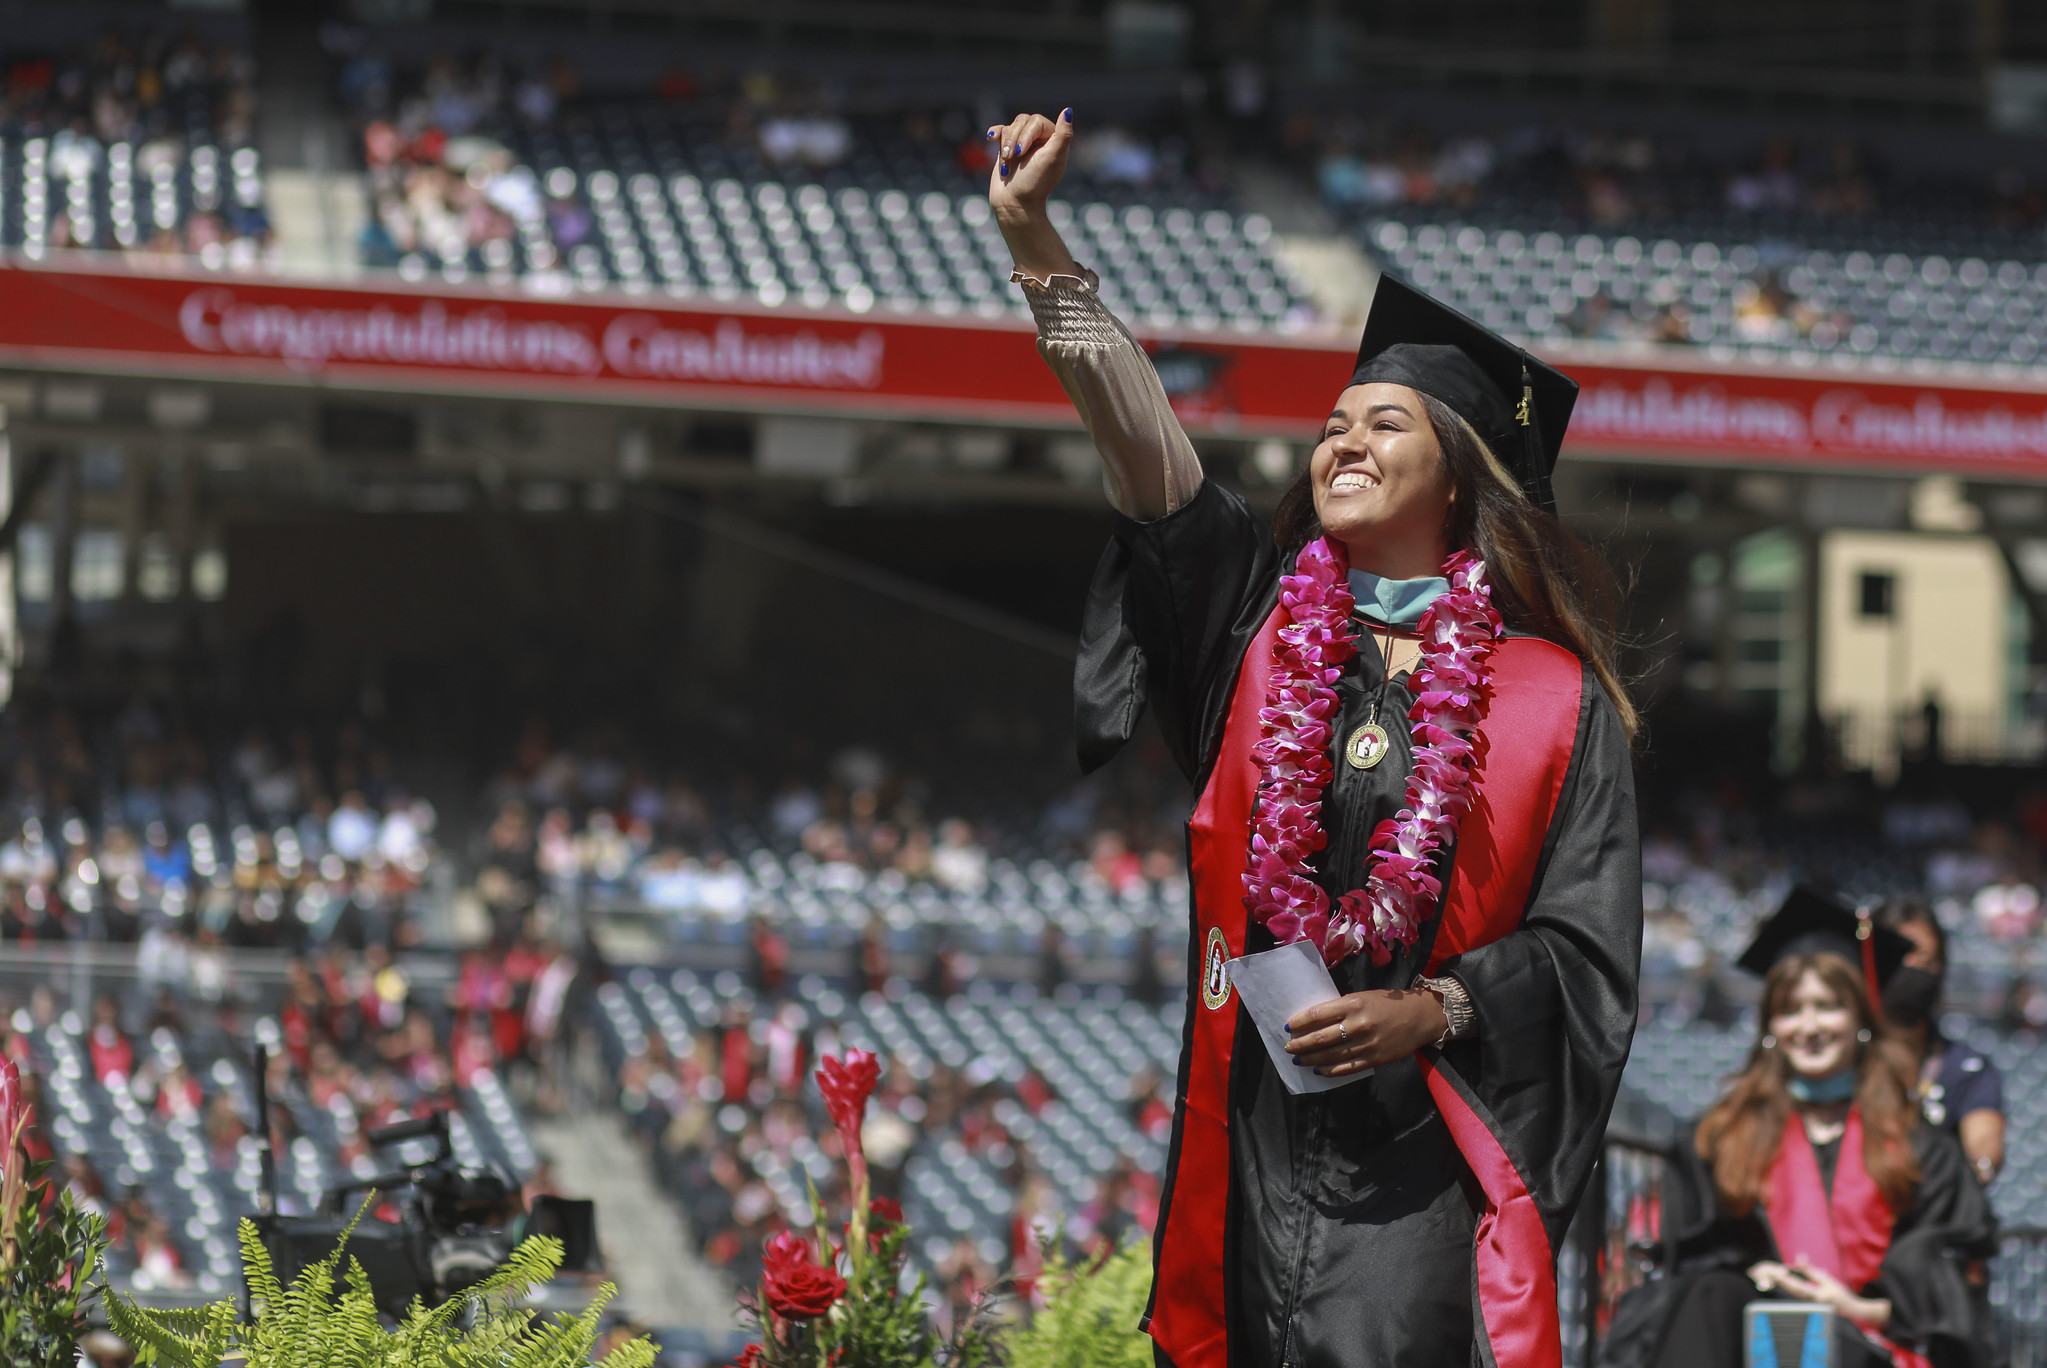 Woman wearing graduation robe and cap with hand in the air in triumph and celebration at a university commencement ceremony.